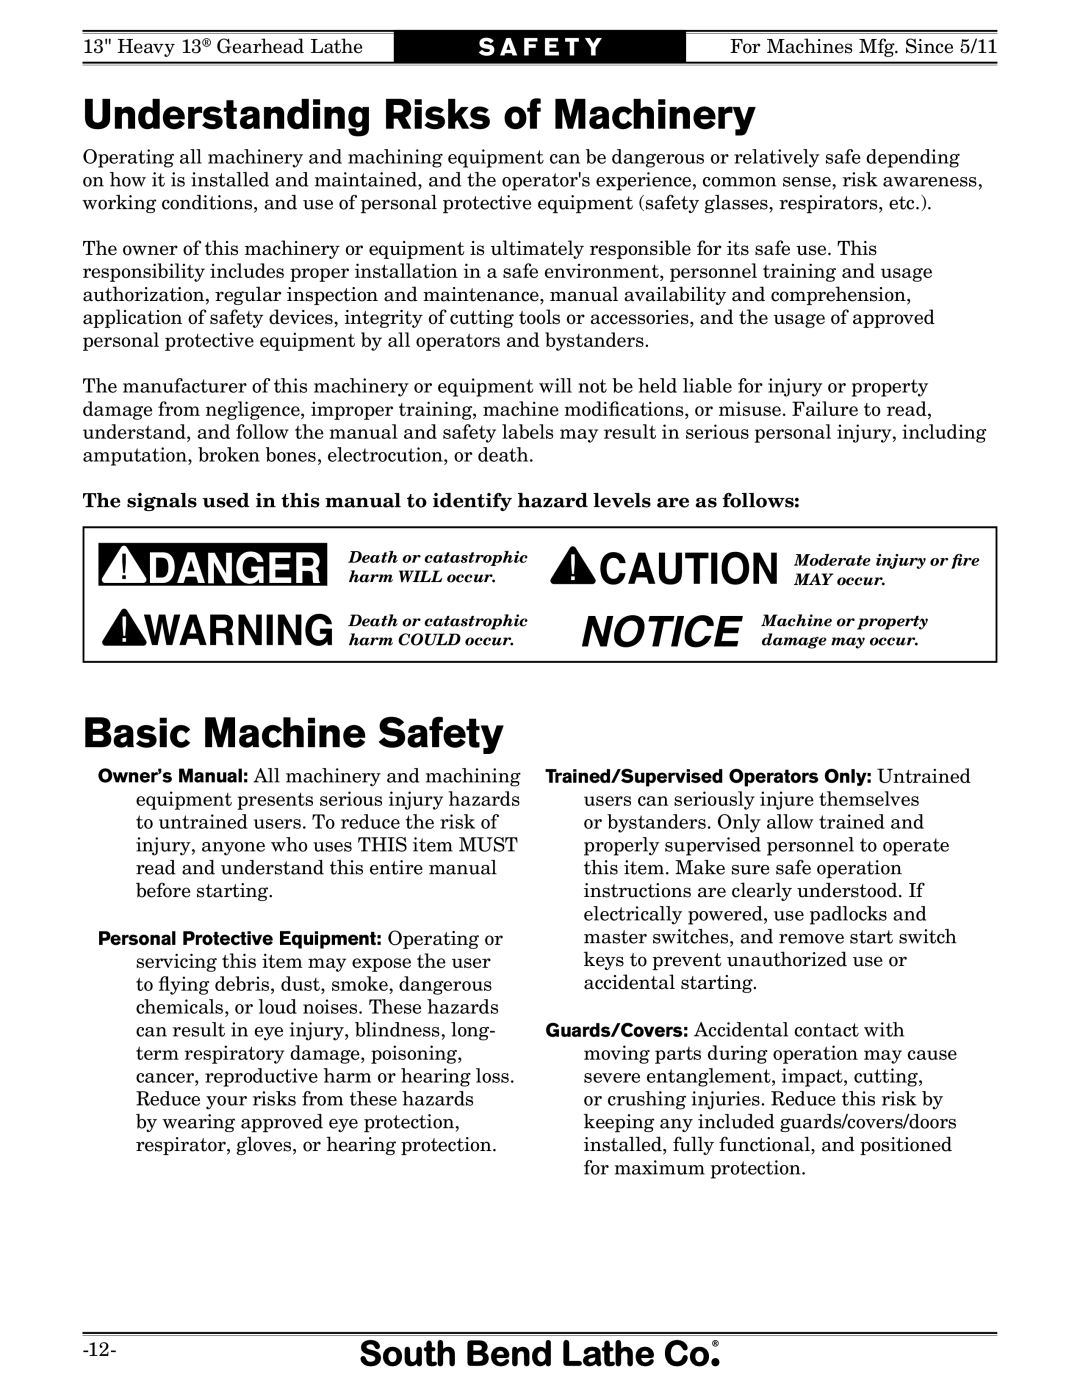 Southbend SB owner manual Understanding Risks of Machinery, Basic Machine Safety, S A F E T Y 